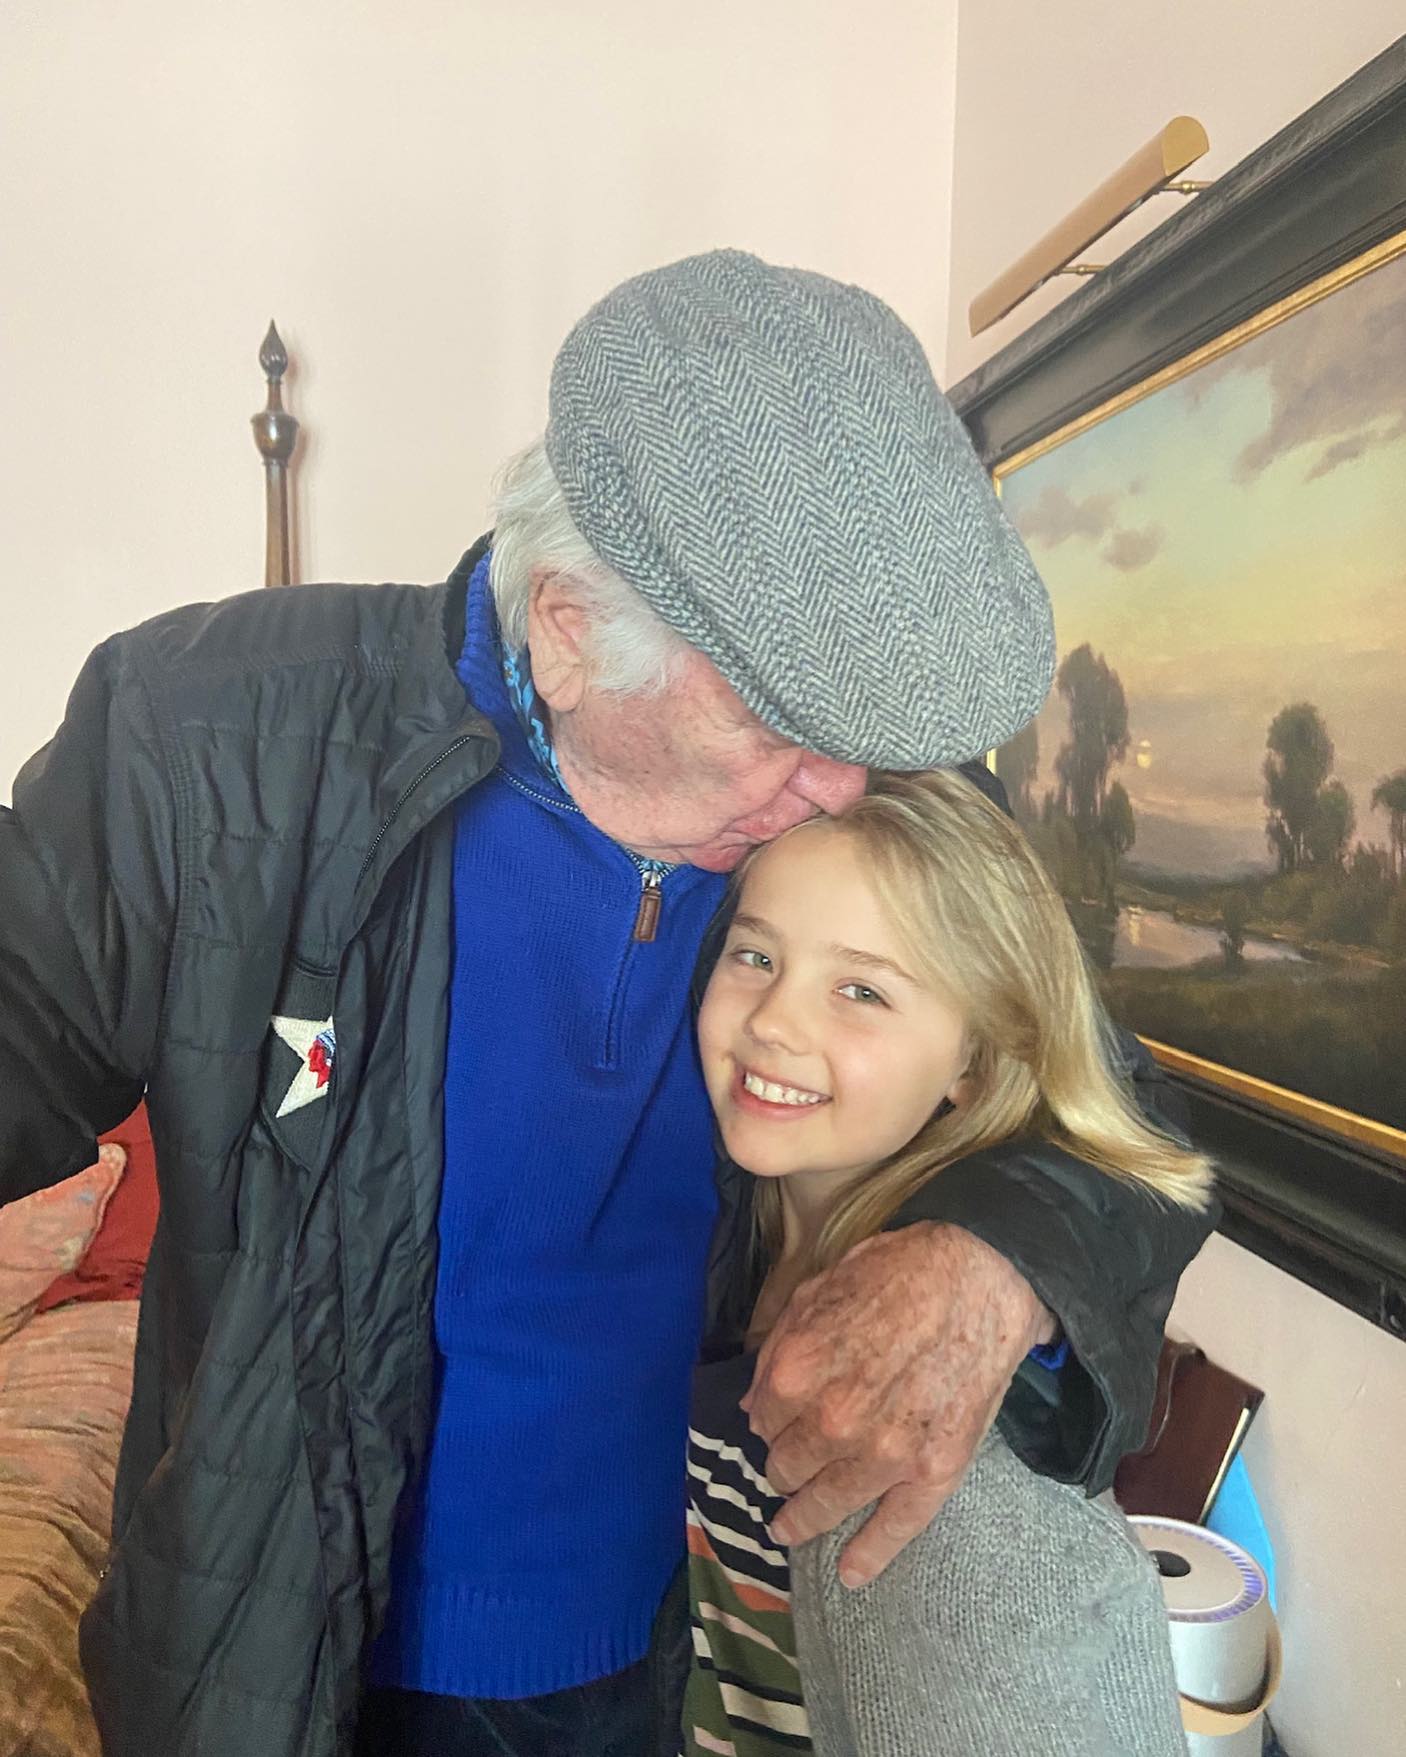 A kiss for this special granddaughter of ours on her 10th birthday. Grandma and Grandpa love you Clover and wish you a very happy and incredible birthday. @ngdubdubs 

.
.
#robertwagner #jillstjohn #natashagregsonwagner #10thbirthday #granddaughter #love #family #grandchildlove